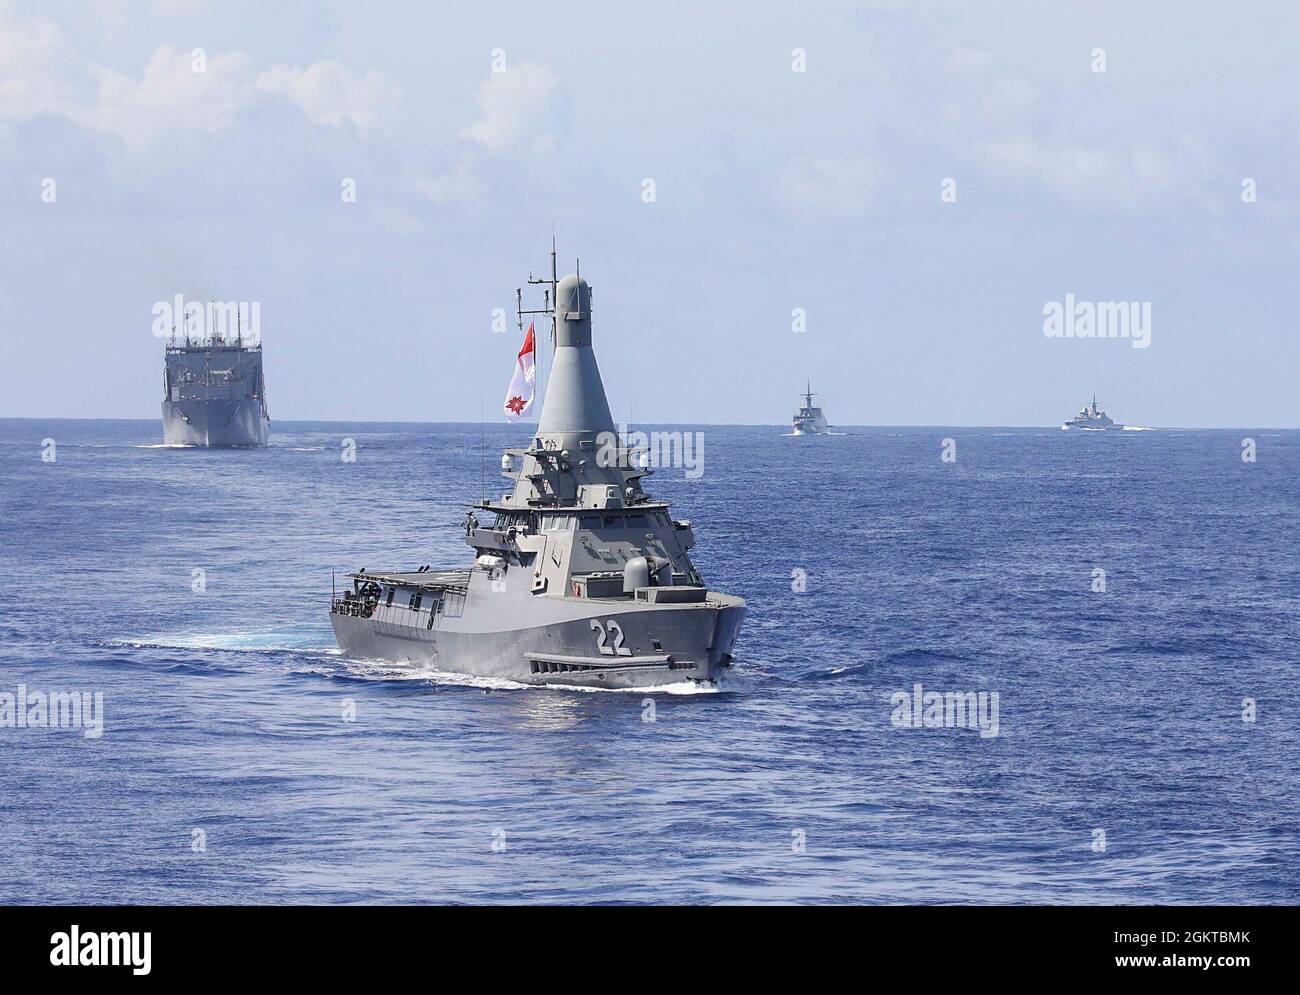 The Republic of Singapore Independence-class littoral mission vessel RSS Fearless (LMV 22) sails in formation with Lewis and Clark class dry cargo and ammunition ship USNS Amelia Earhart (T-AKE 6), and Republic of Singapore Formidable-class frigates RSS Tenacious (FFC 71) and RSS Stalwart (FFC 72), for a photo exercise (PHOTOEX) during Pacific Griffin 2021. Pacific Griffin is considered the most complex and warfare-centric bilateral engagement between both navies and represents a continued investment in the strengthening of the solid partnership between the U.S. and Republic of Singapore. Stock Photo